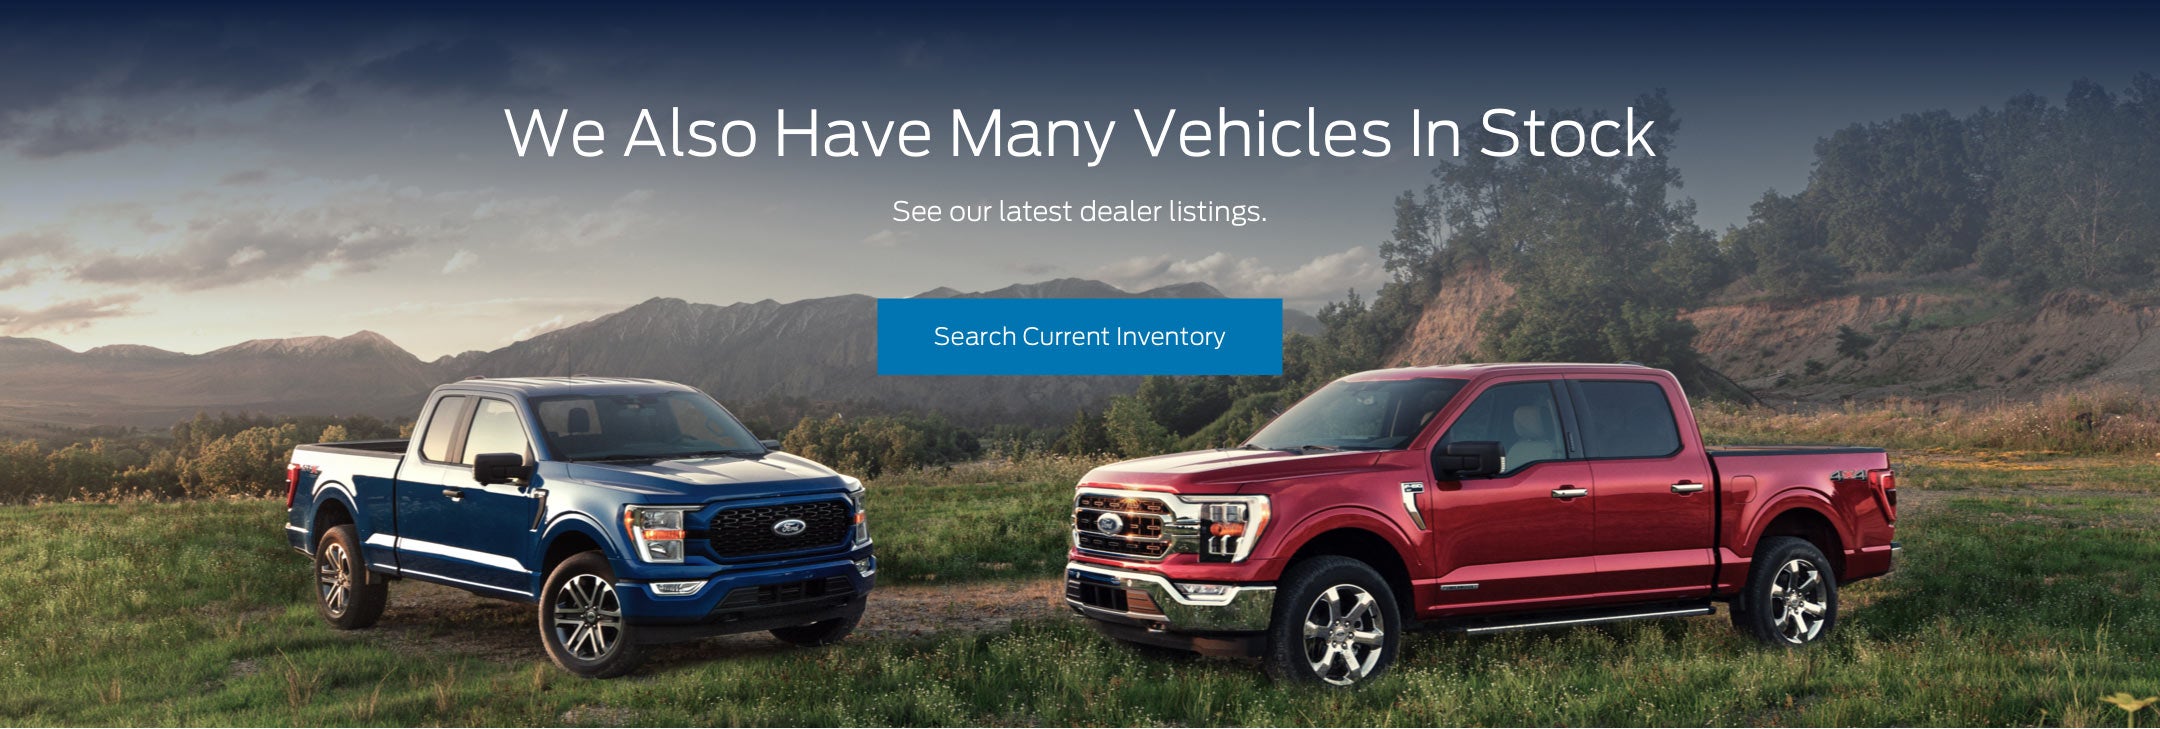 Ford vehicles in stock | Sullivan Ford in Brookhaven MS